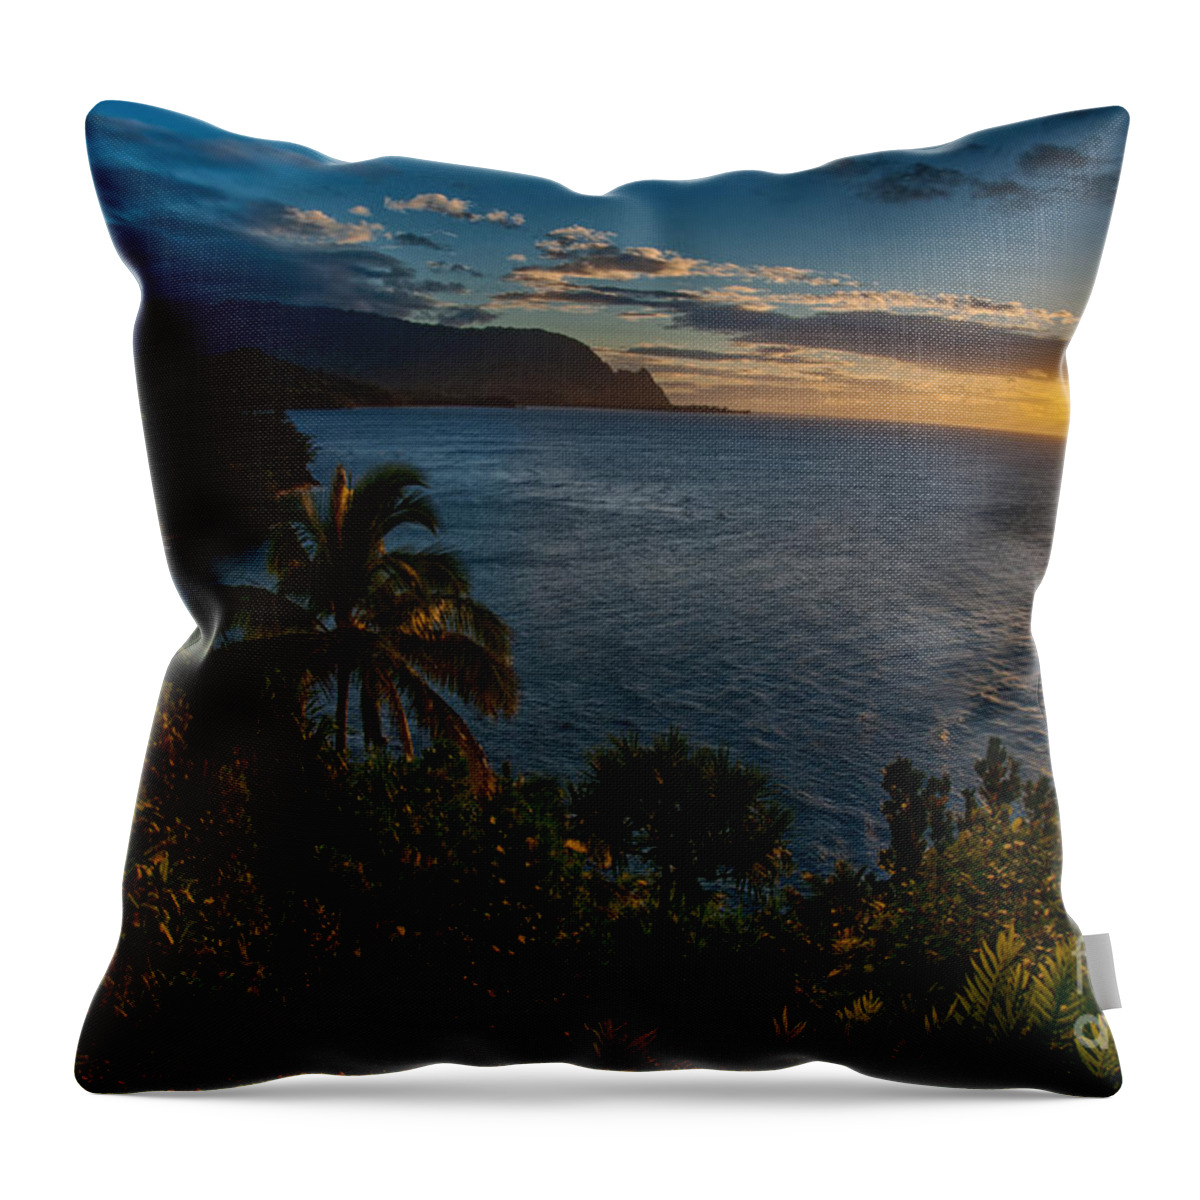 Sunset Throw Pillow featuring the photograph Perfect Sunset by Eye Olating Images